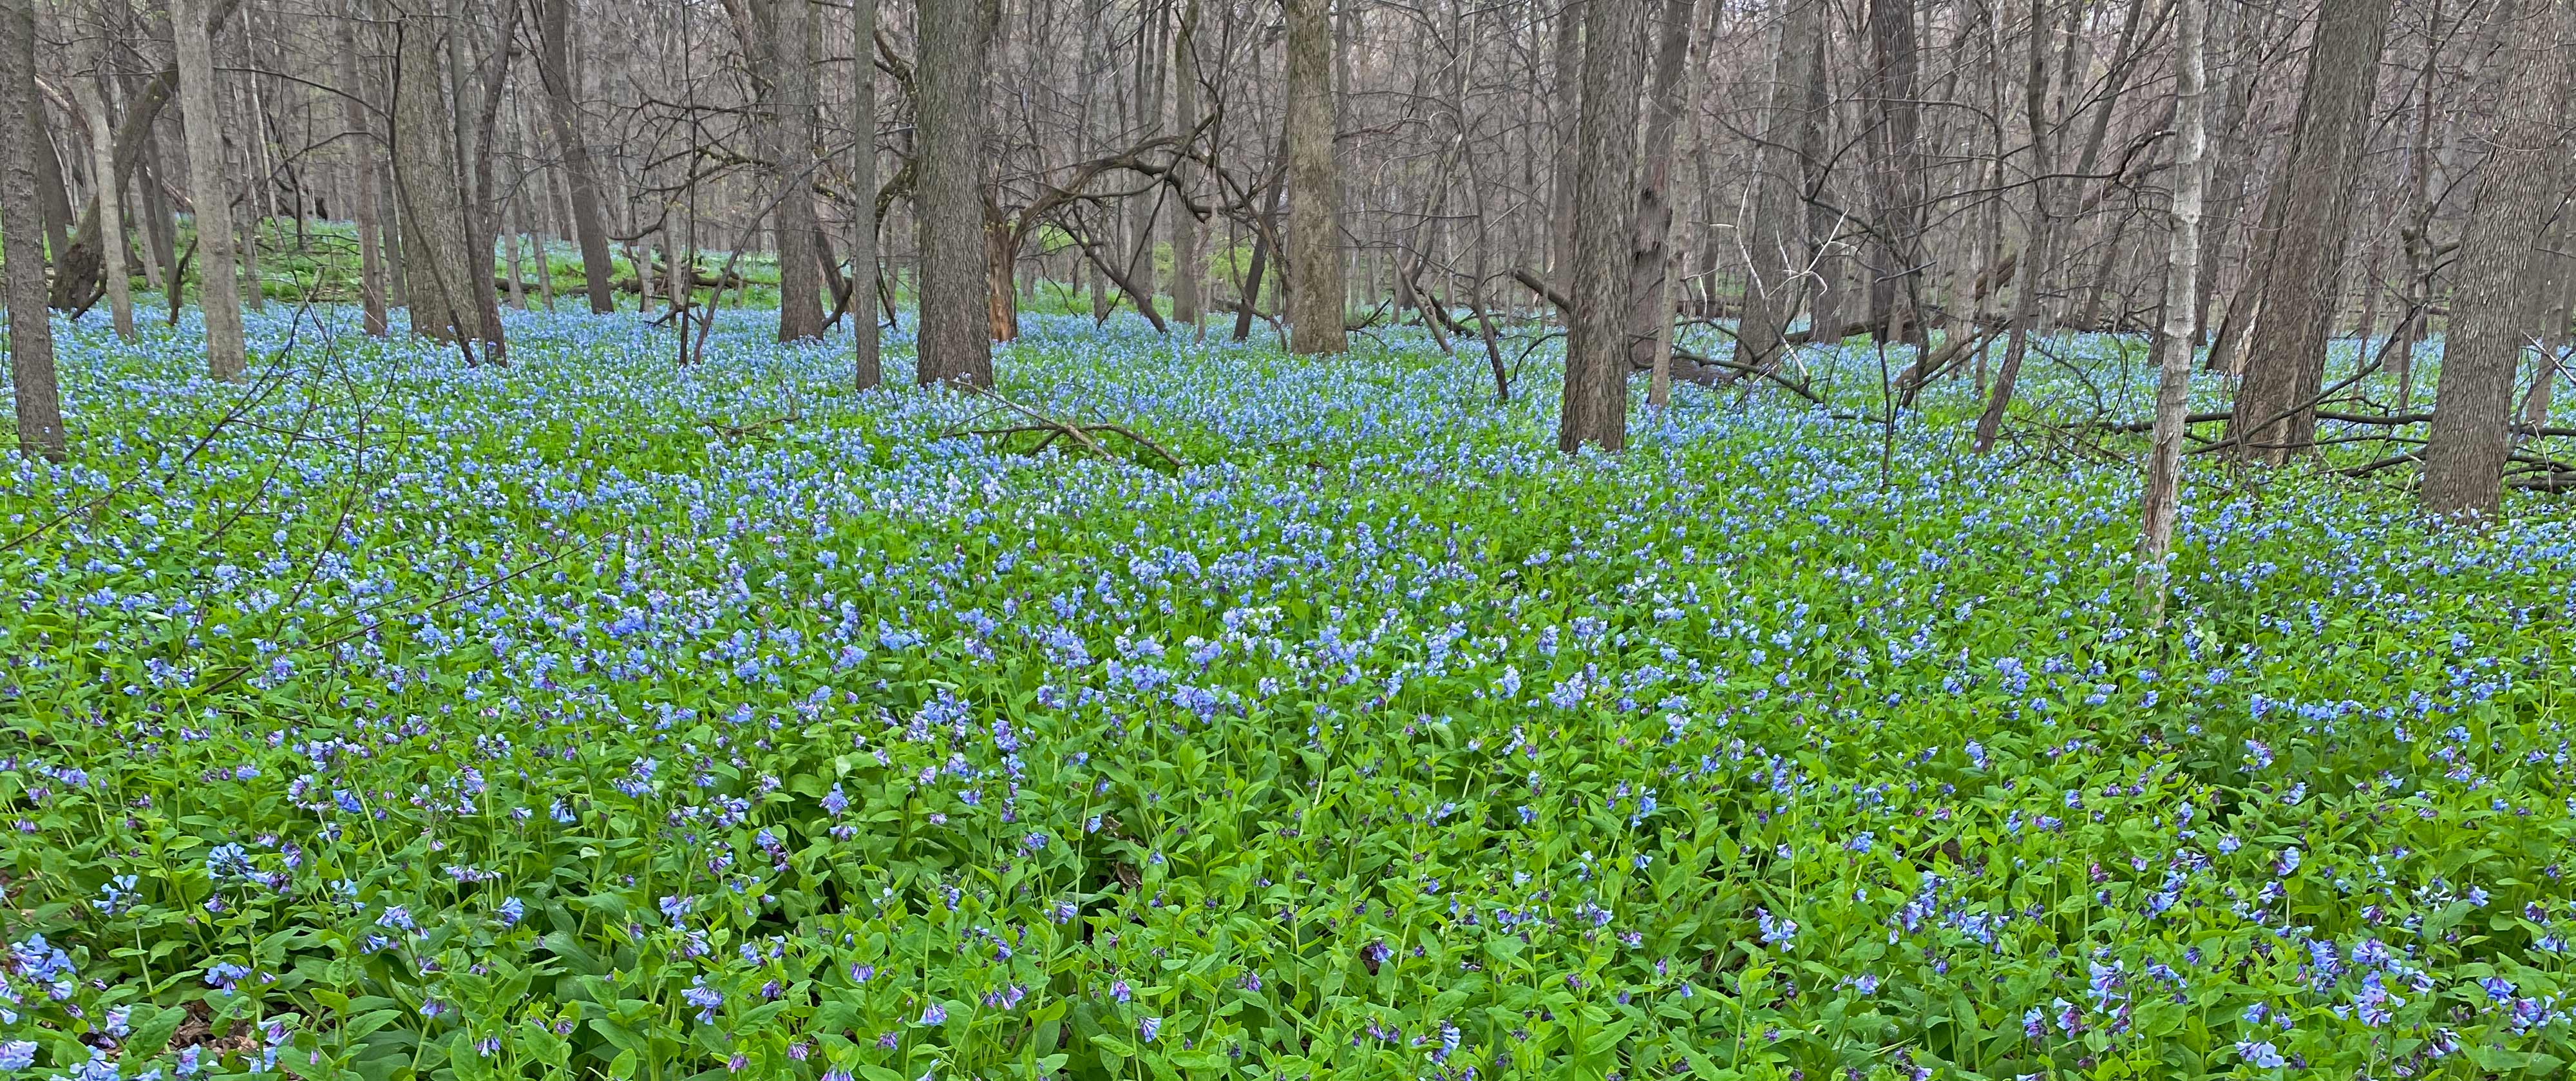 The forest floor is a blanket of bluebells. 